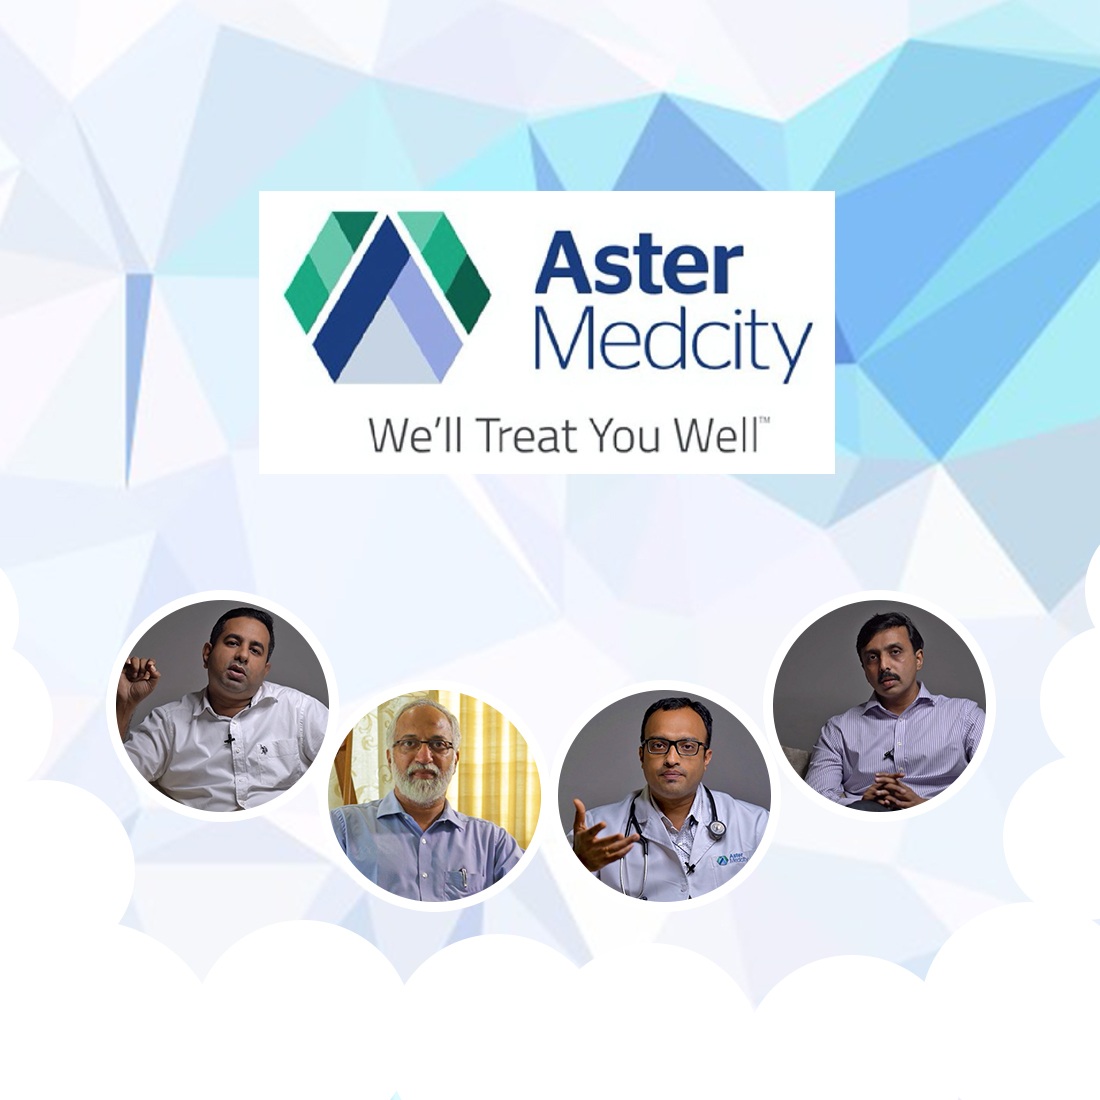 Aster Volunteer Mobile Medical Services launched in Aster Medcity.